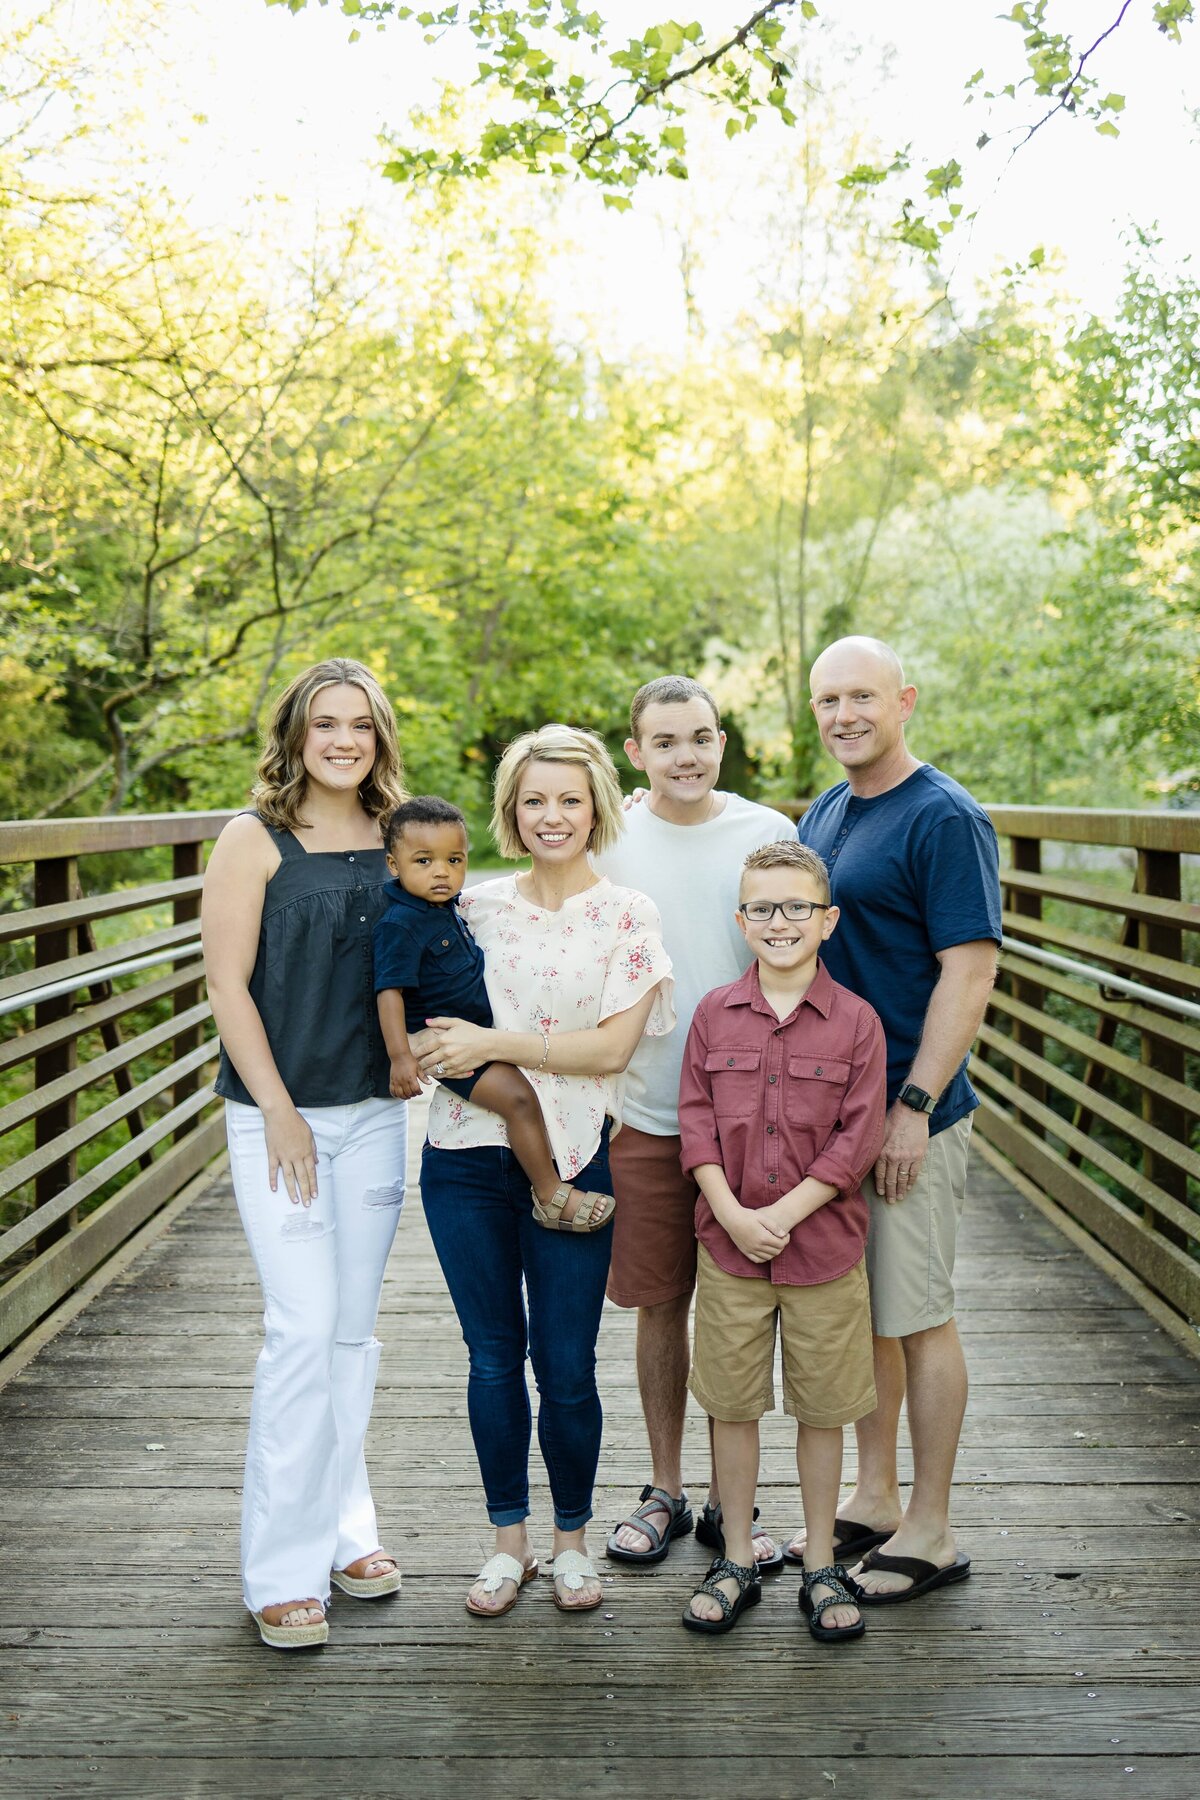 Family takes a picture together in a wooded park in Tennessee